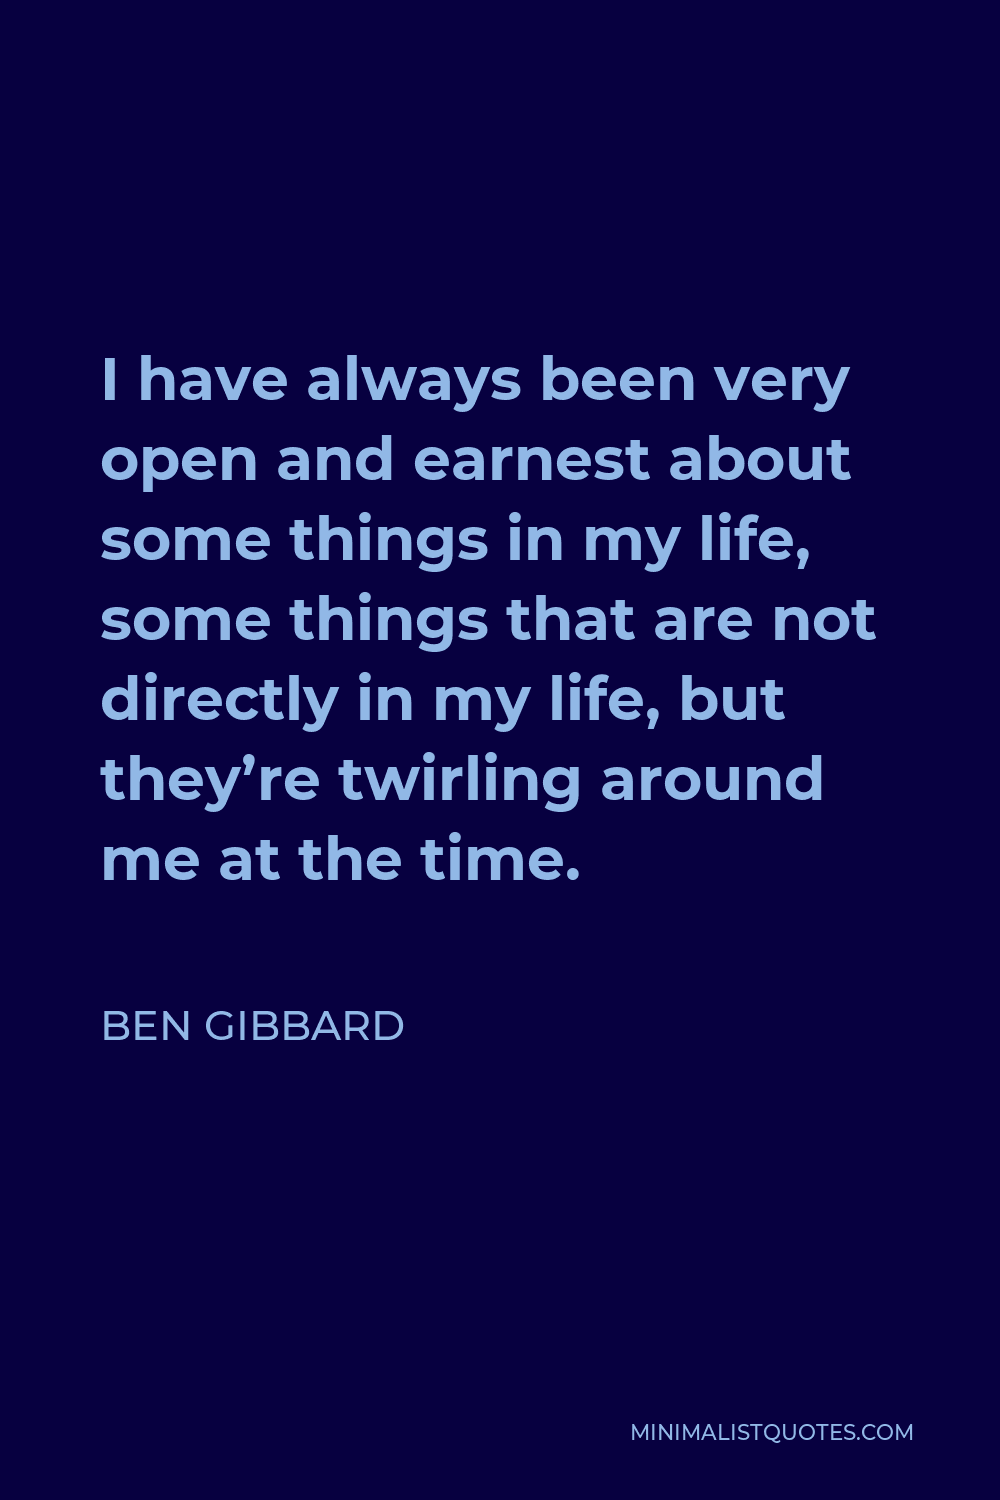 Ben Gibbard Quote - I have always been very open and earnest about some things in my life, some things that are not directly in my life, but they’re twirling around me at the time.